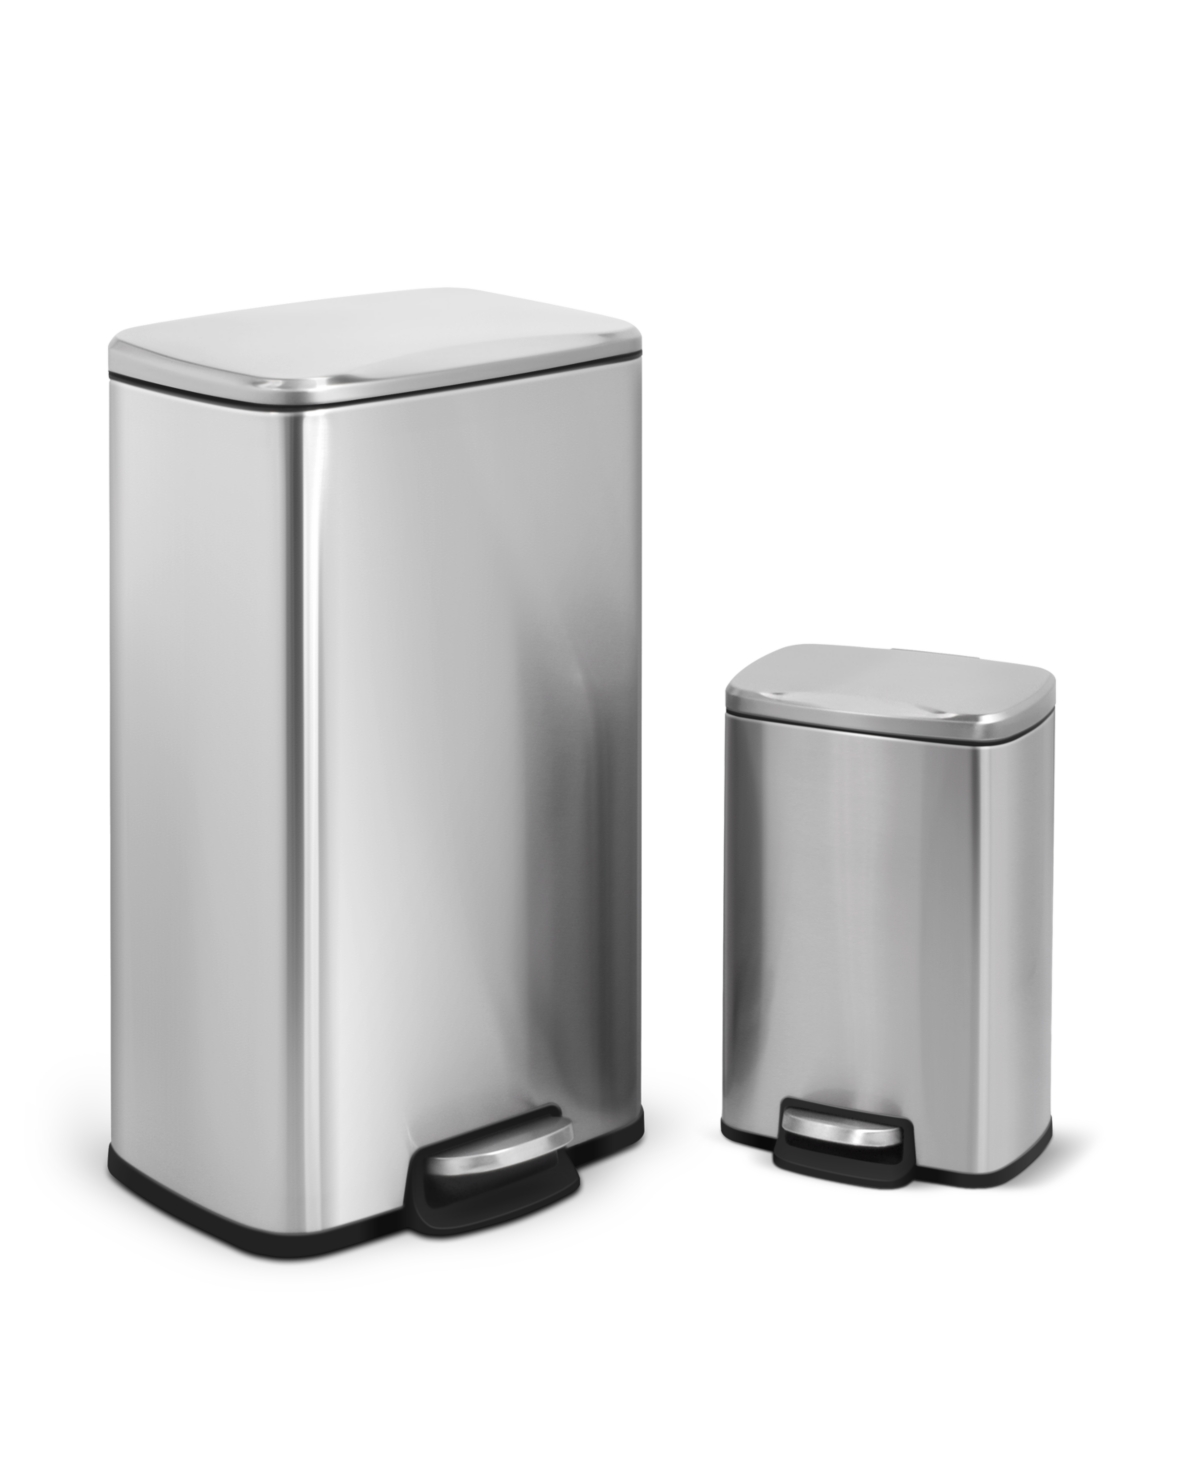 8 Gal./30 Liter and 1.3 Gal./5 Liter Rectangular Stainless Steel Step-on Trash Can Set for Kitchen and Bathroom - Sliver